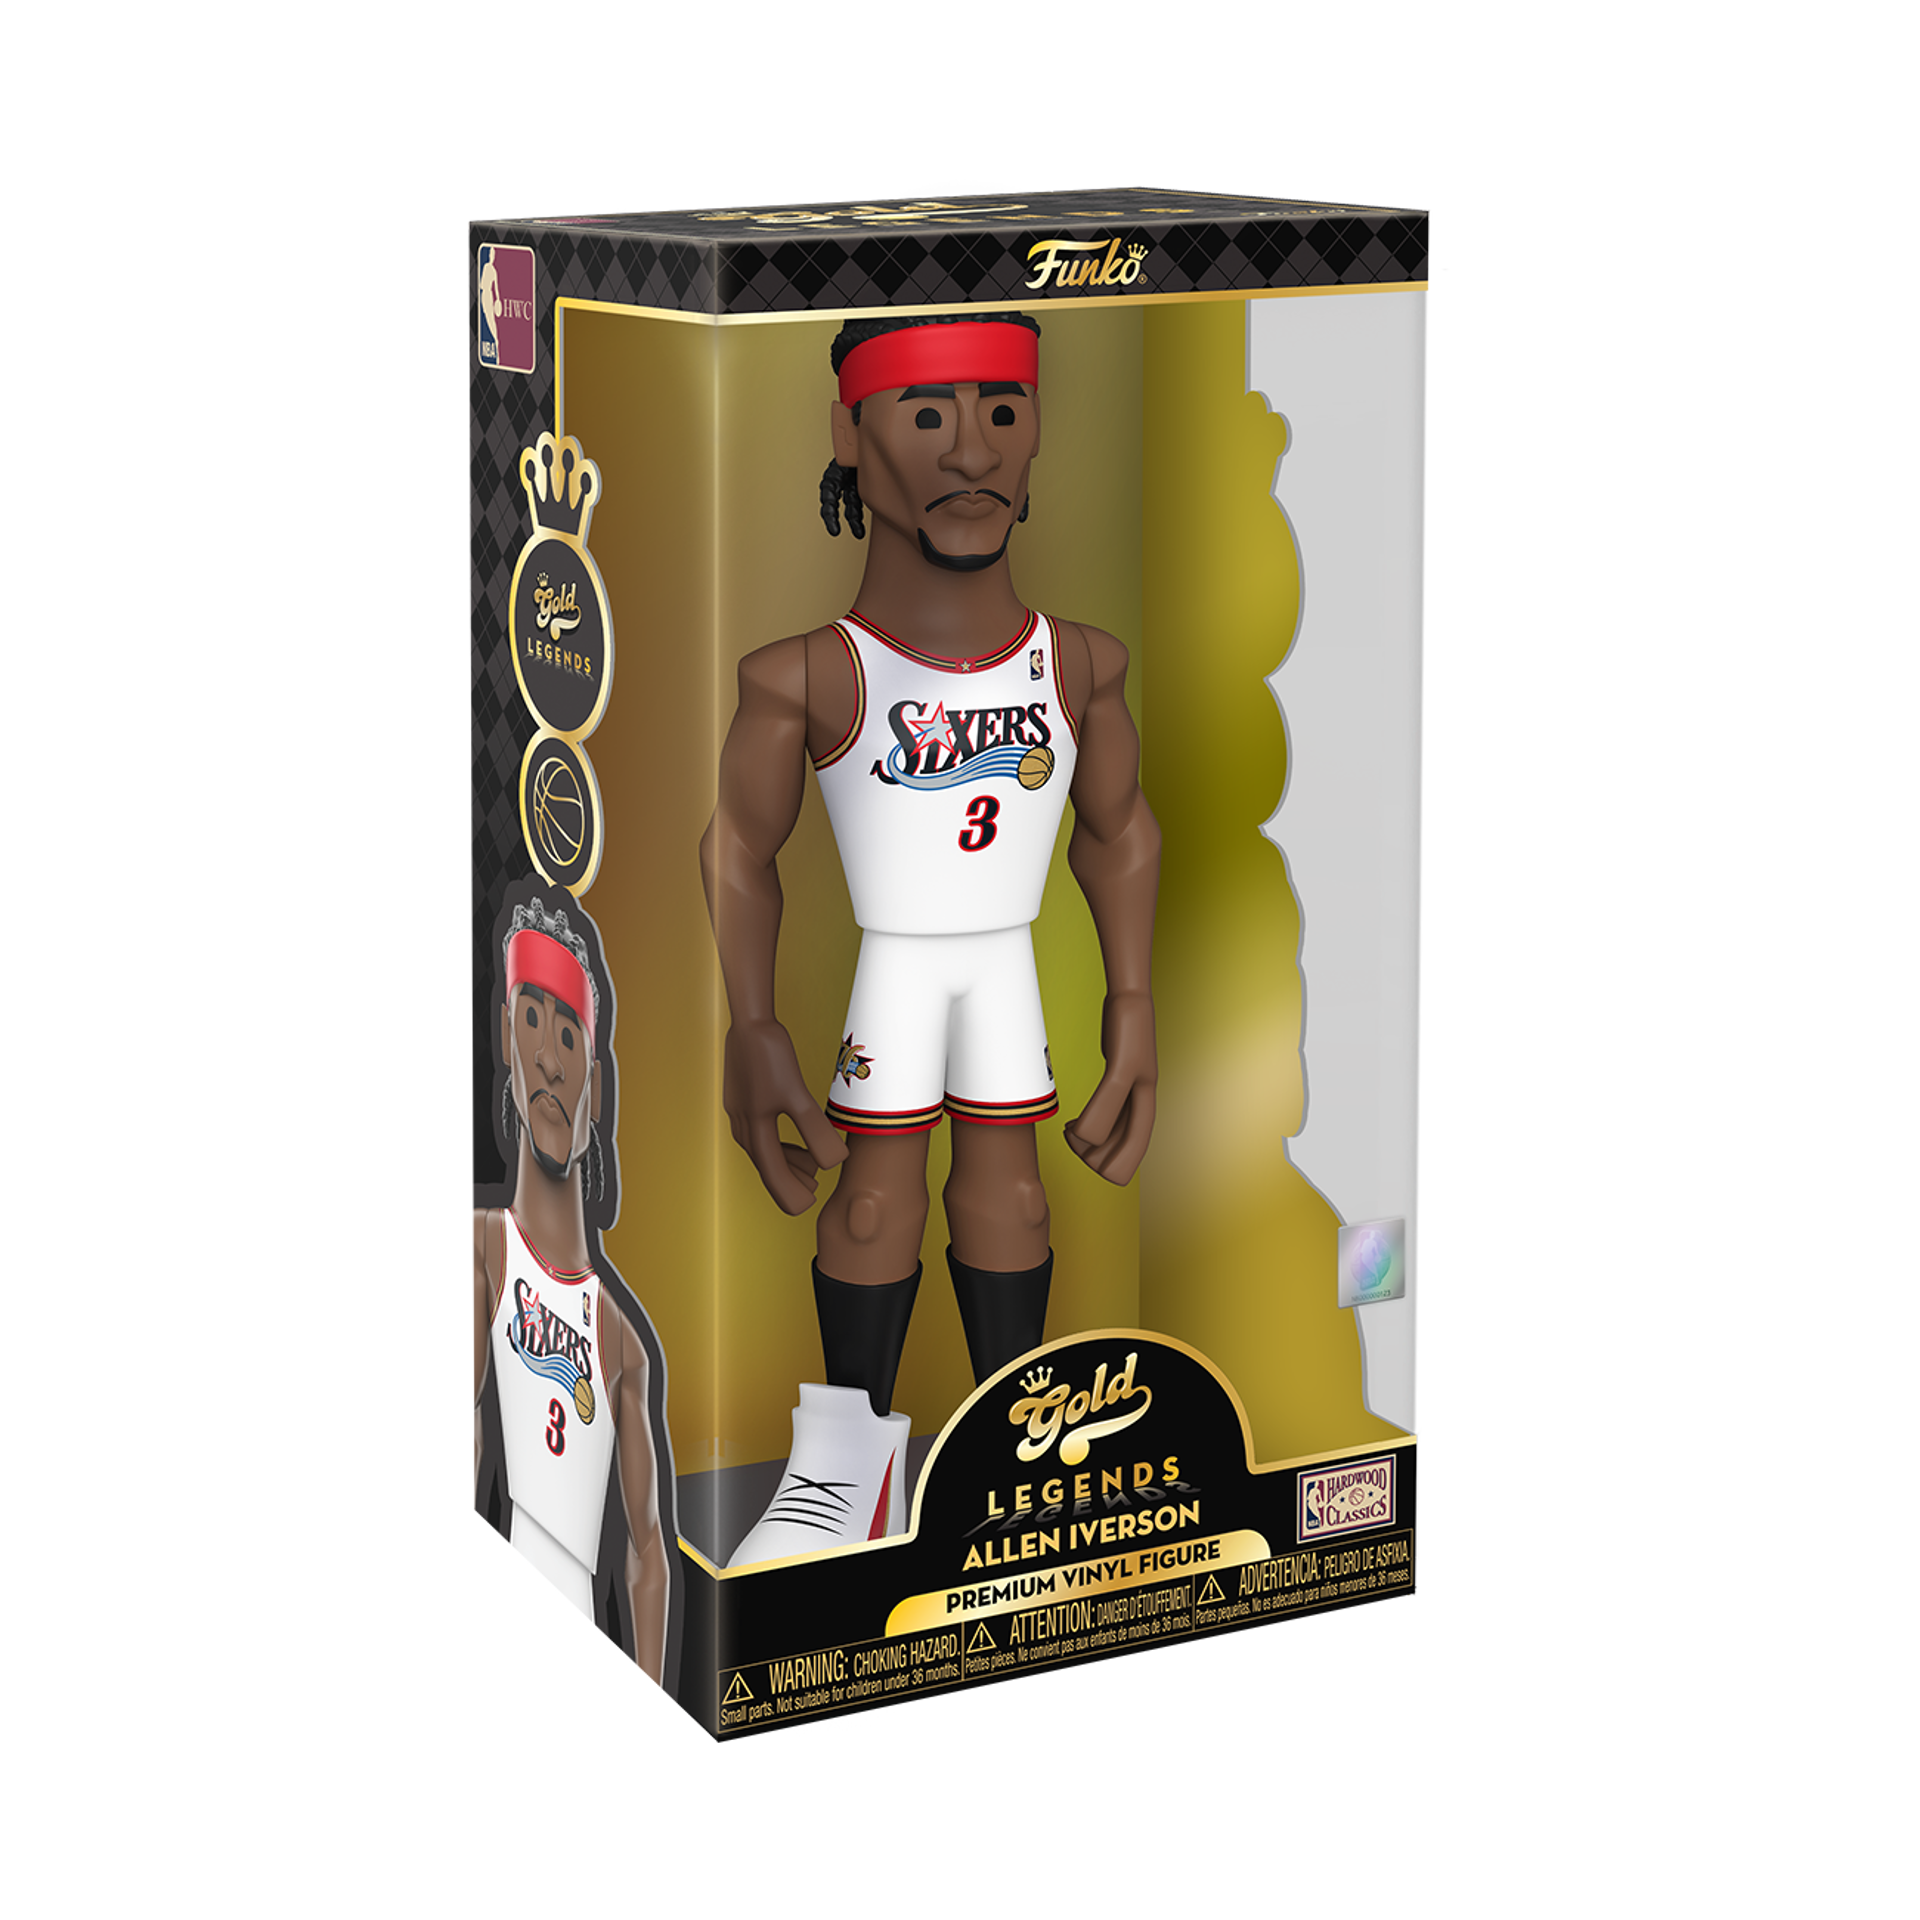 Funko Gold Legends: NBA Magic - Shaquille O'Neal 12" Premium Vinyl Figure (with Chase) ENG Merchandising